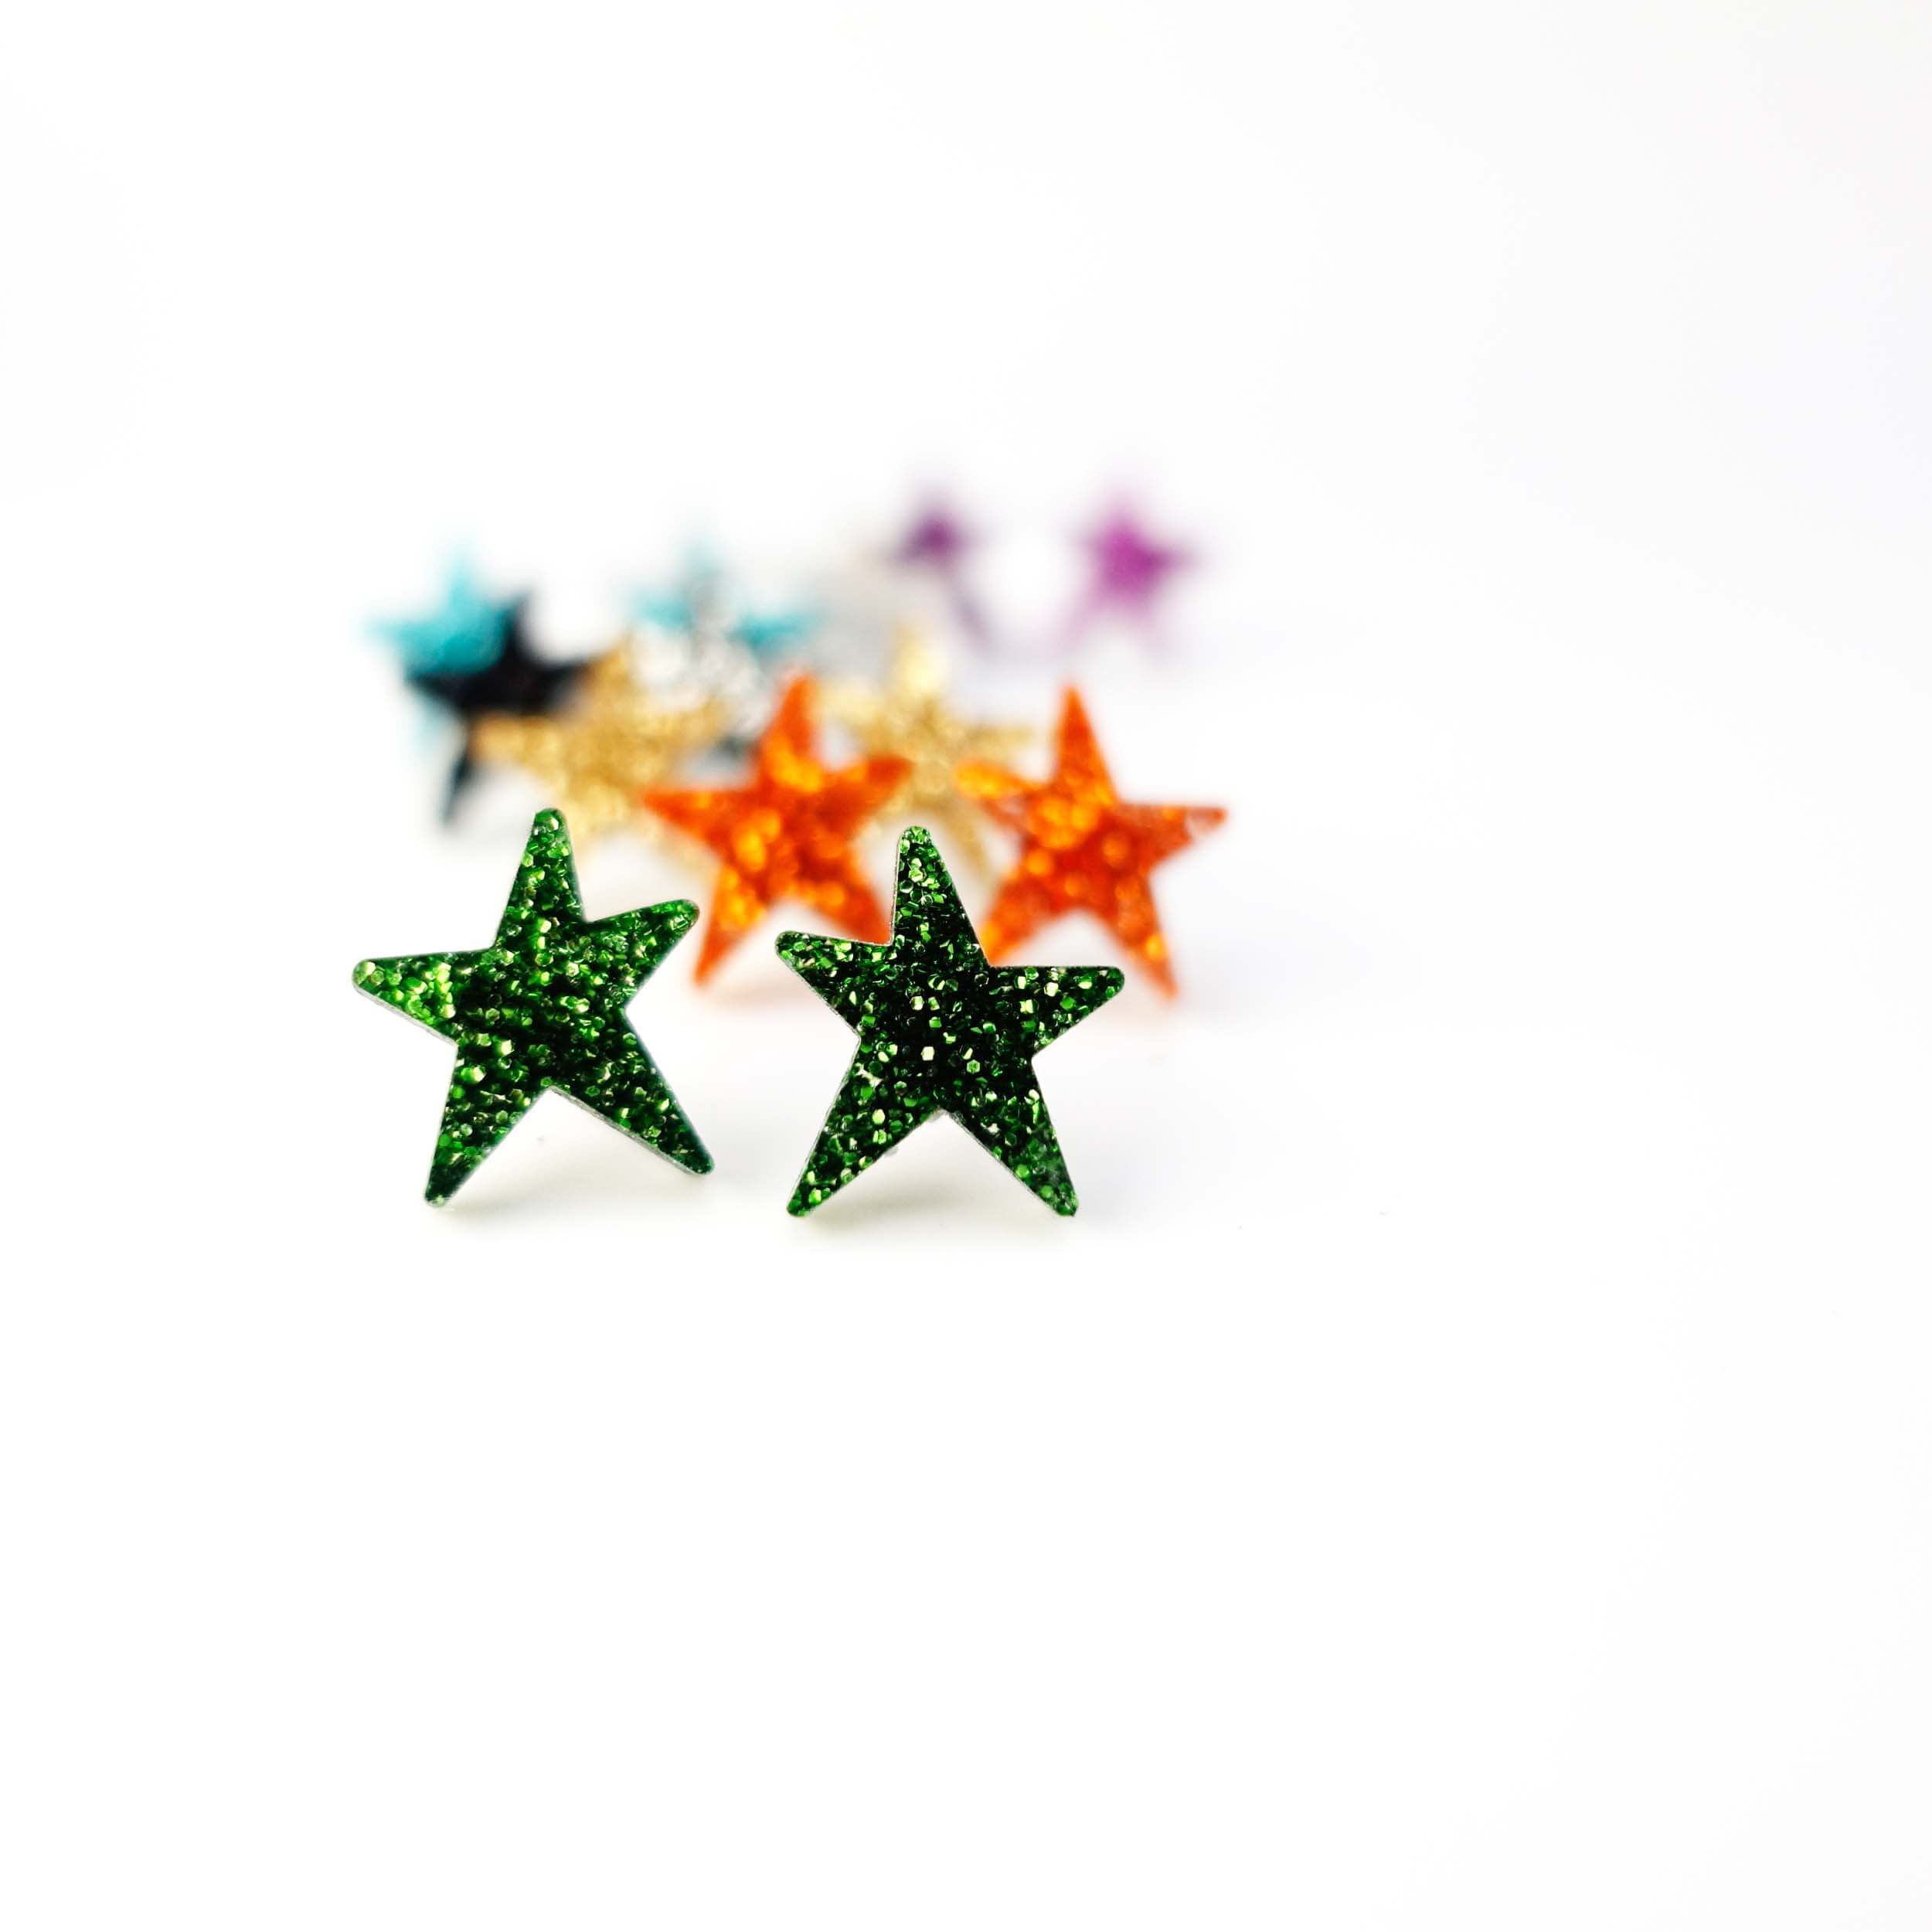 Moss glitter funky Wear and Resist star earrings shown on a white background. 